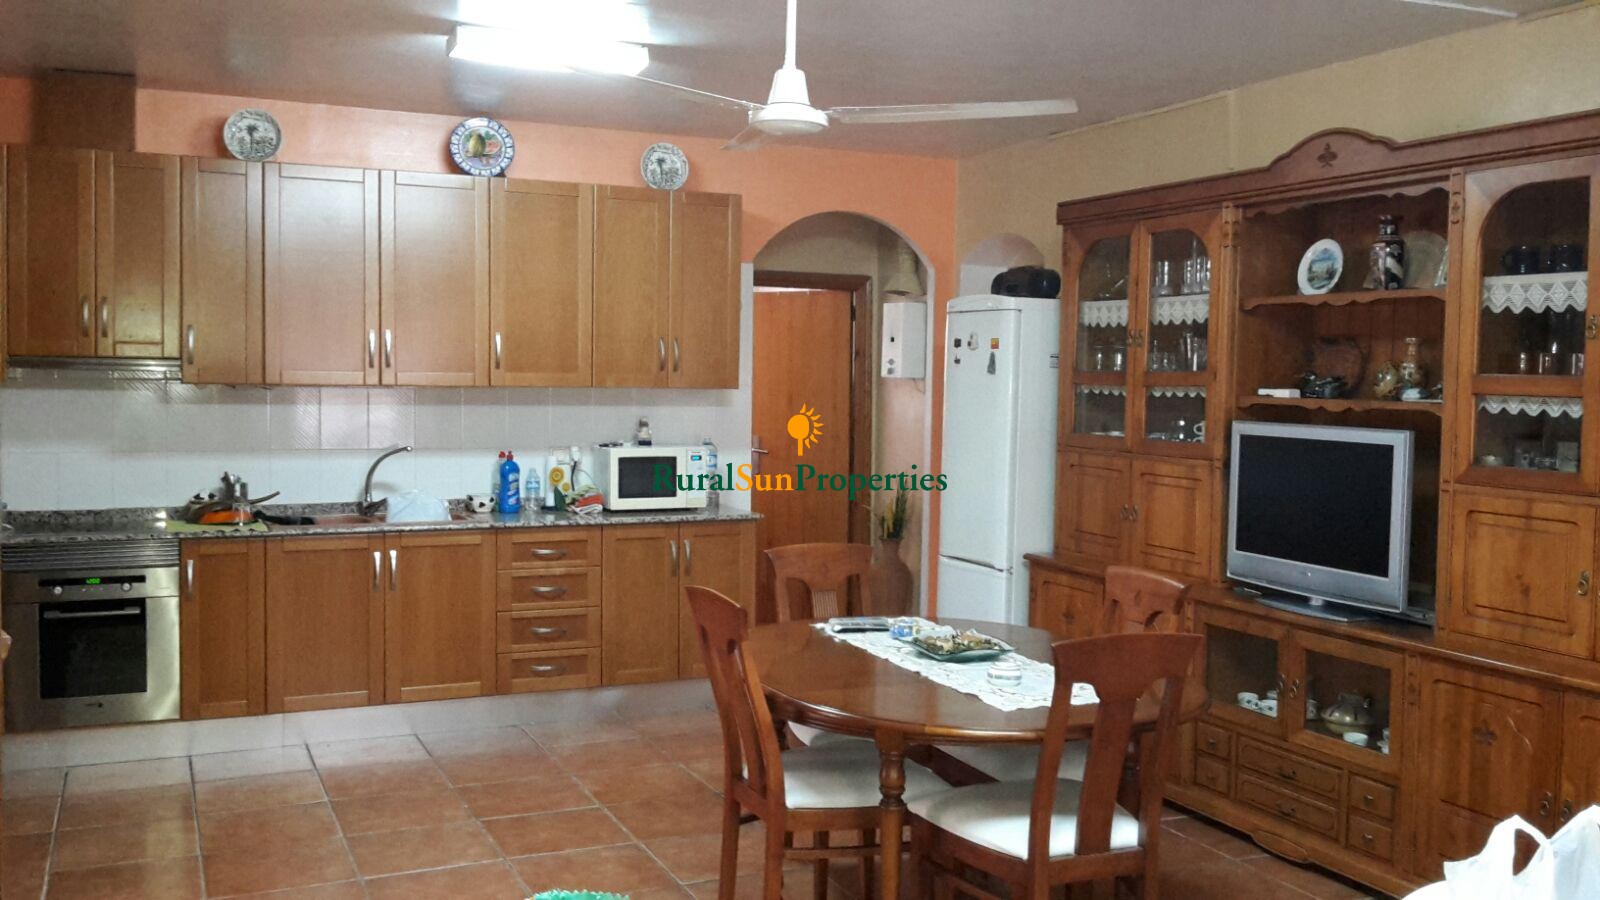 Sale country house/finca for sale in Yecla. 10,000 sq.m plot